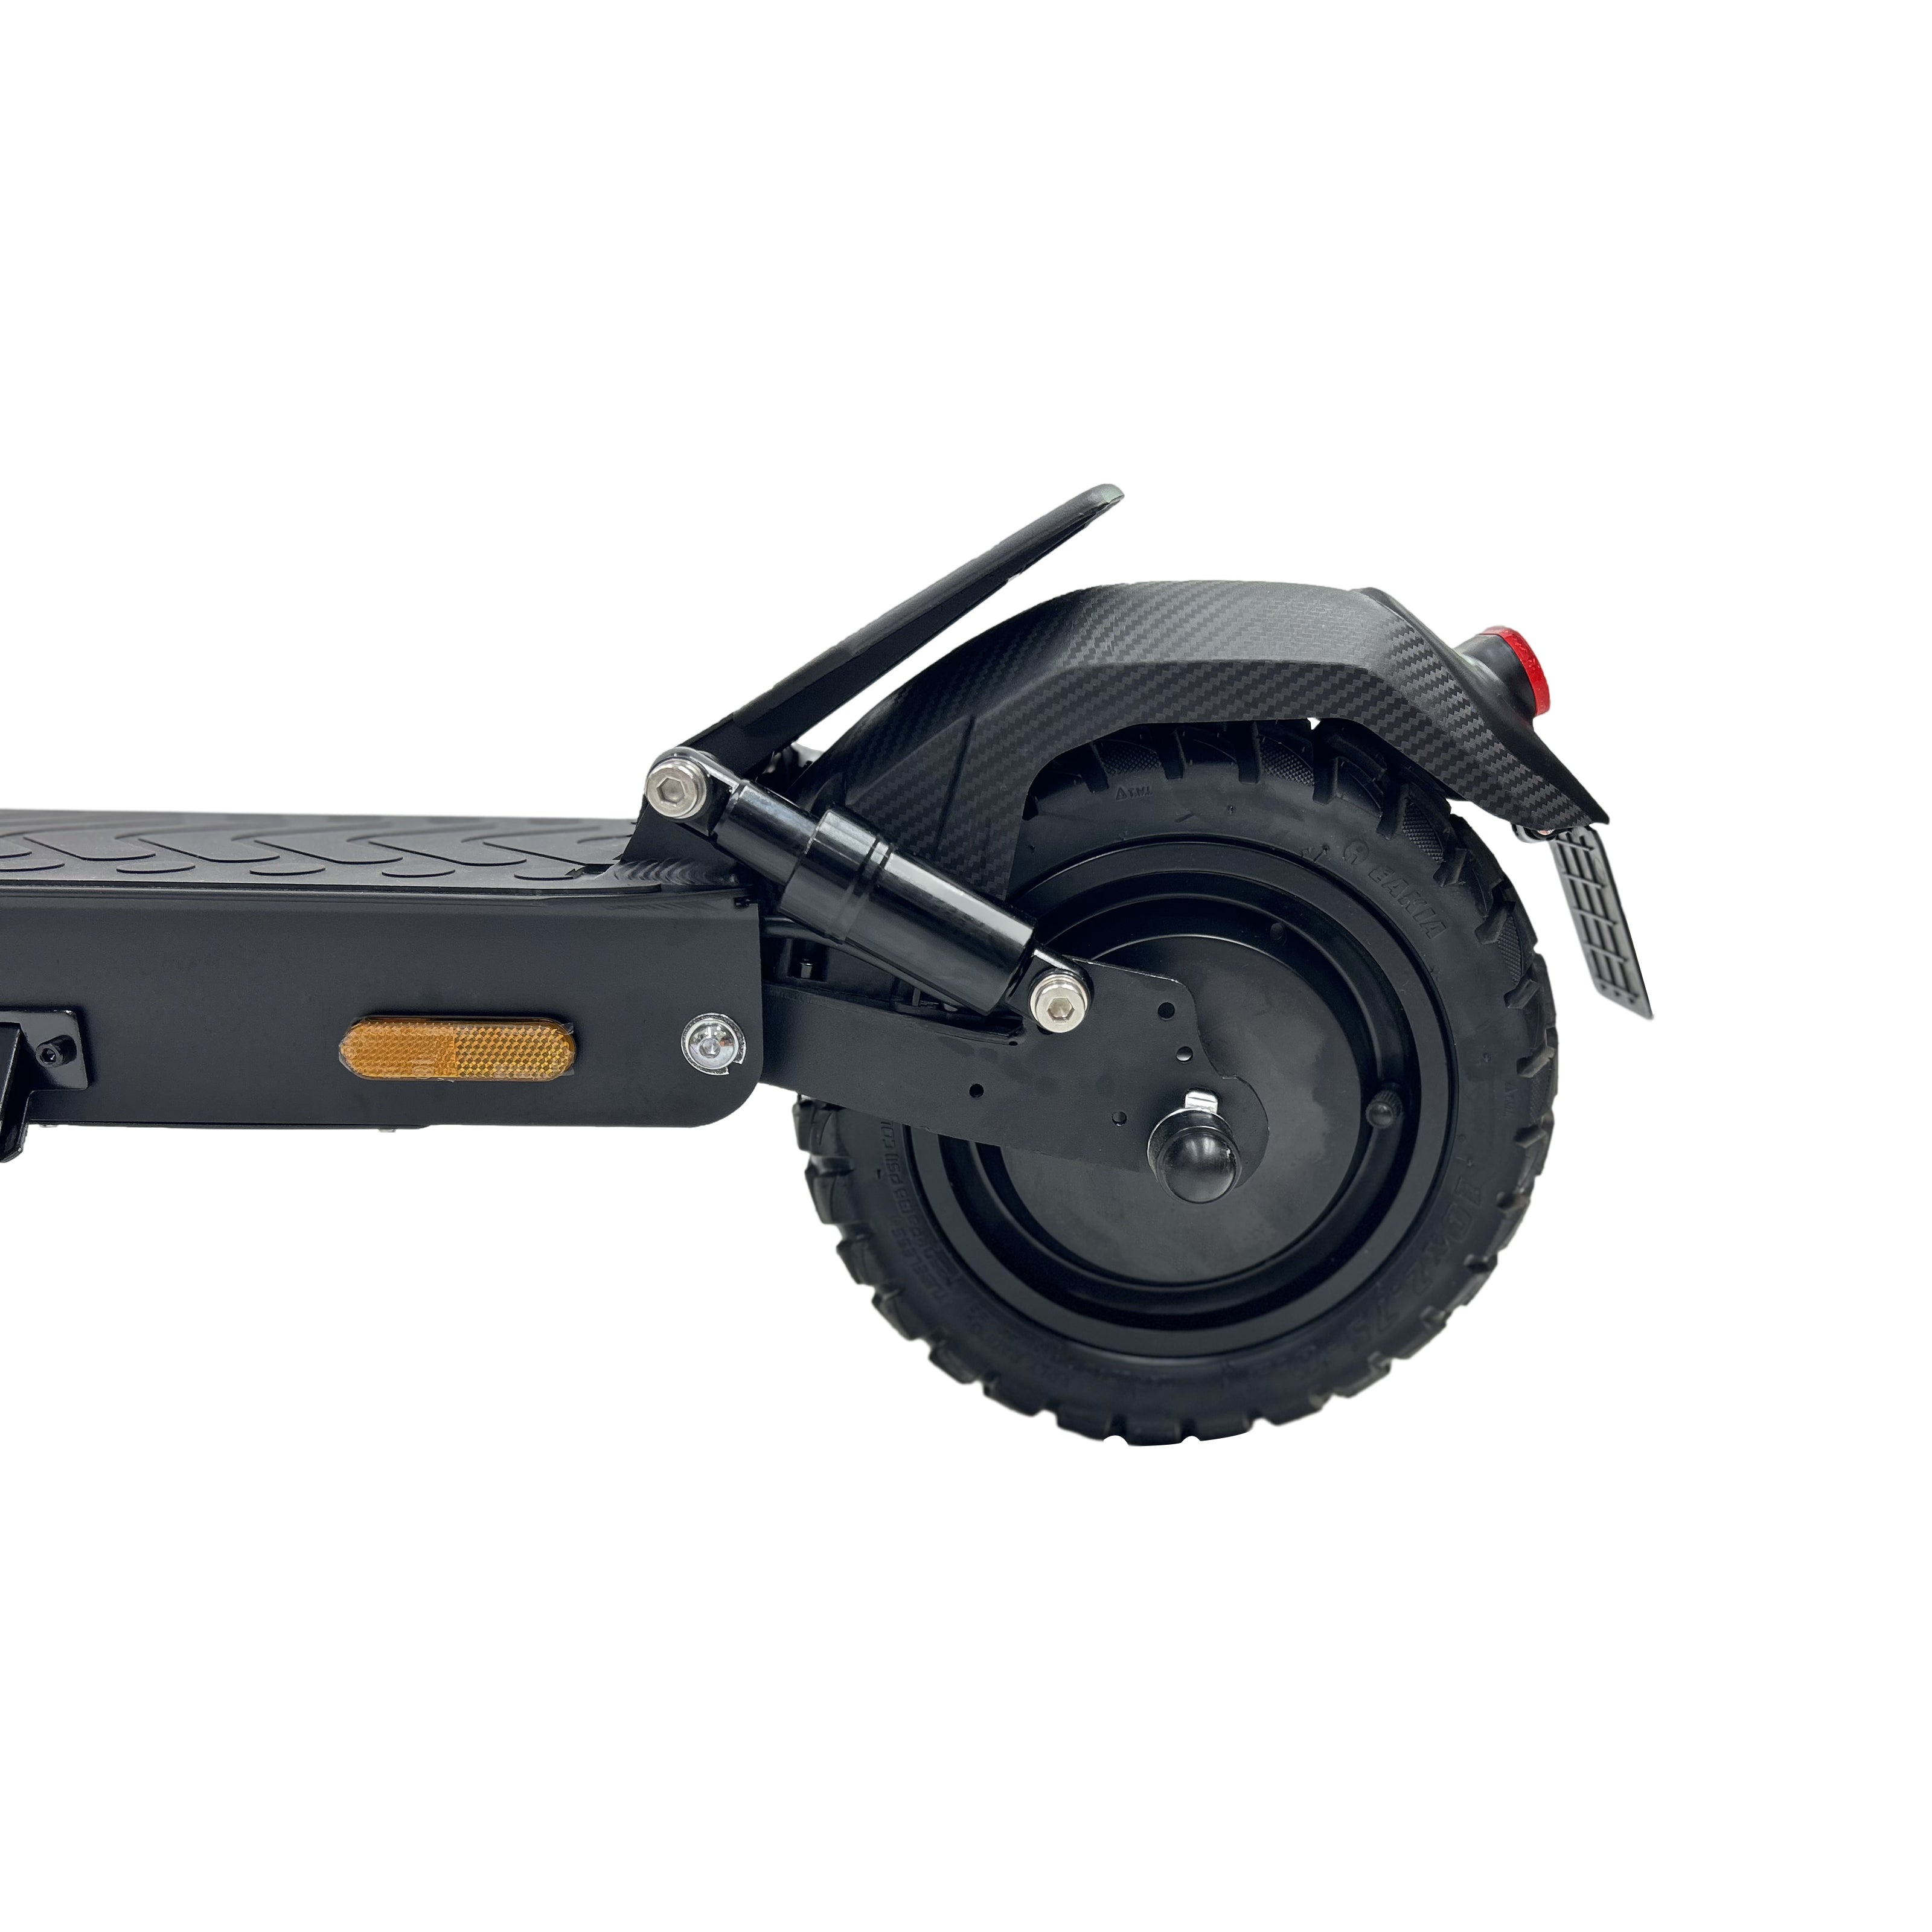 E9G-MAX 45-55kms range E Scooter with 500W motor 48V 12.5Ah Lithium Battery